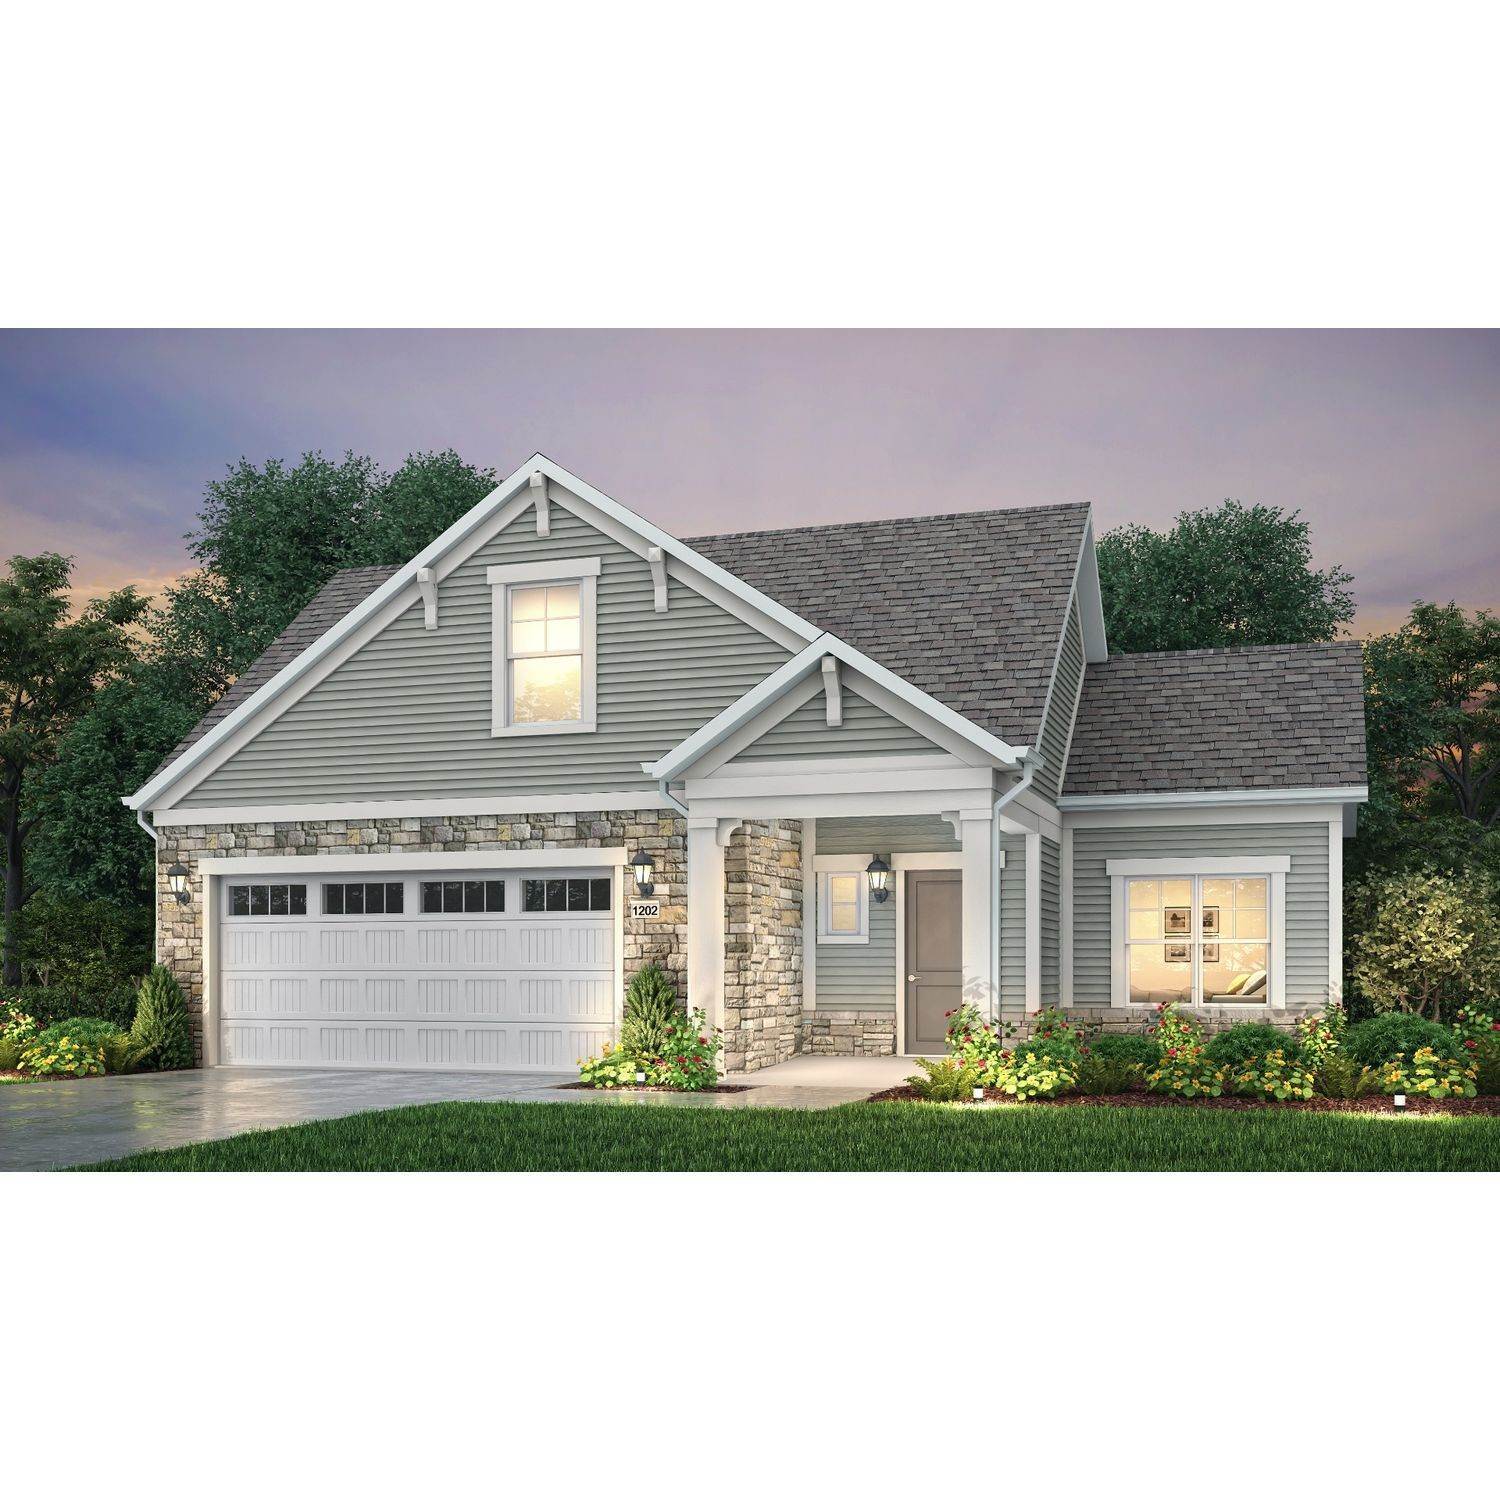 Famille mono-parentale pour l Vente à The Courtyards Of Fishers 16713 Southeastern Pkwy, Fishers, IN 46040